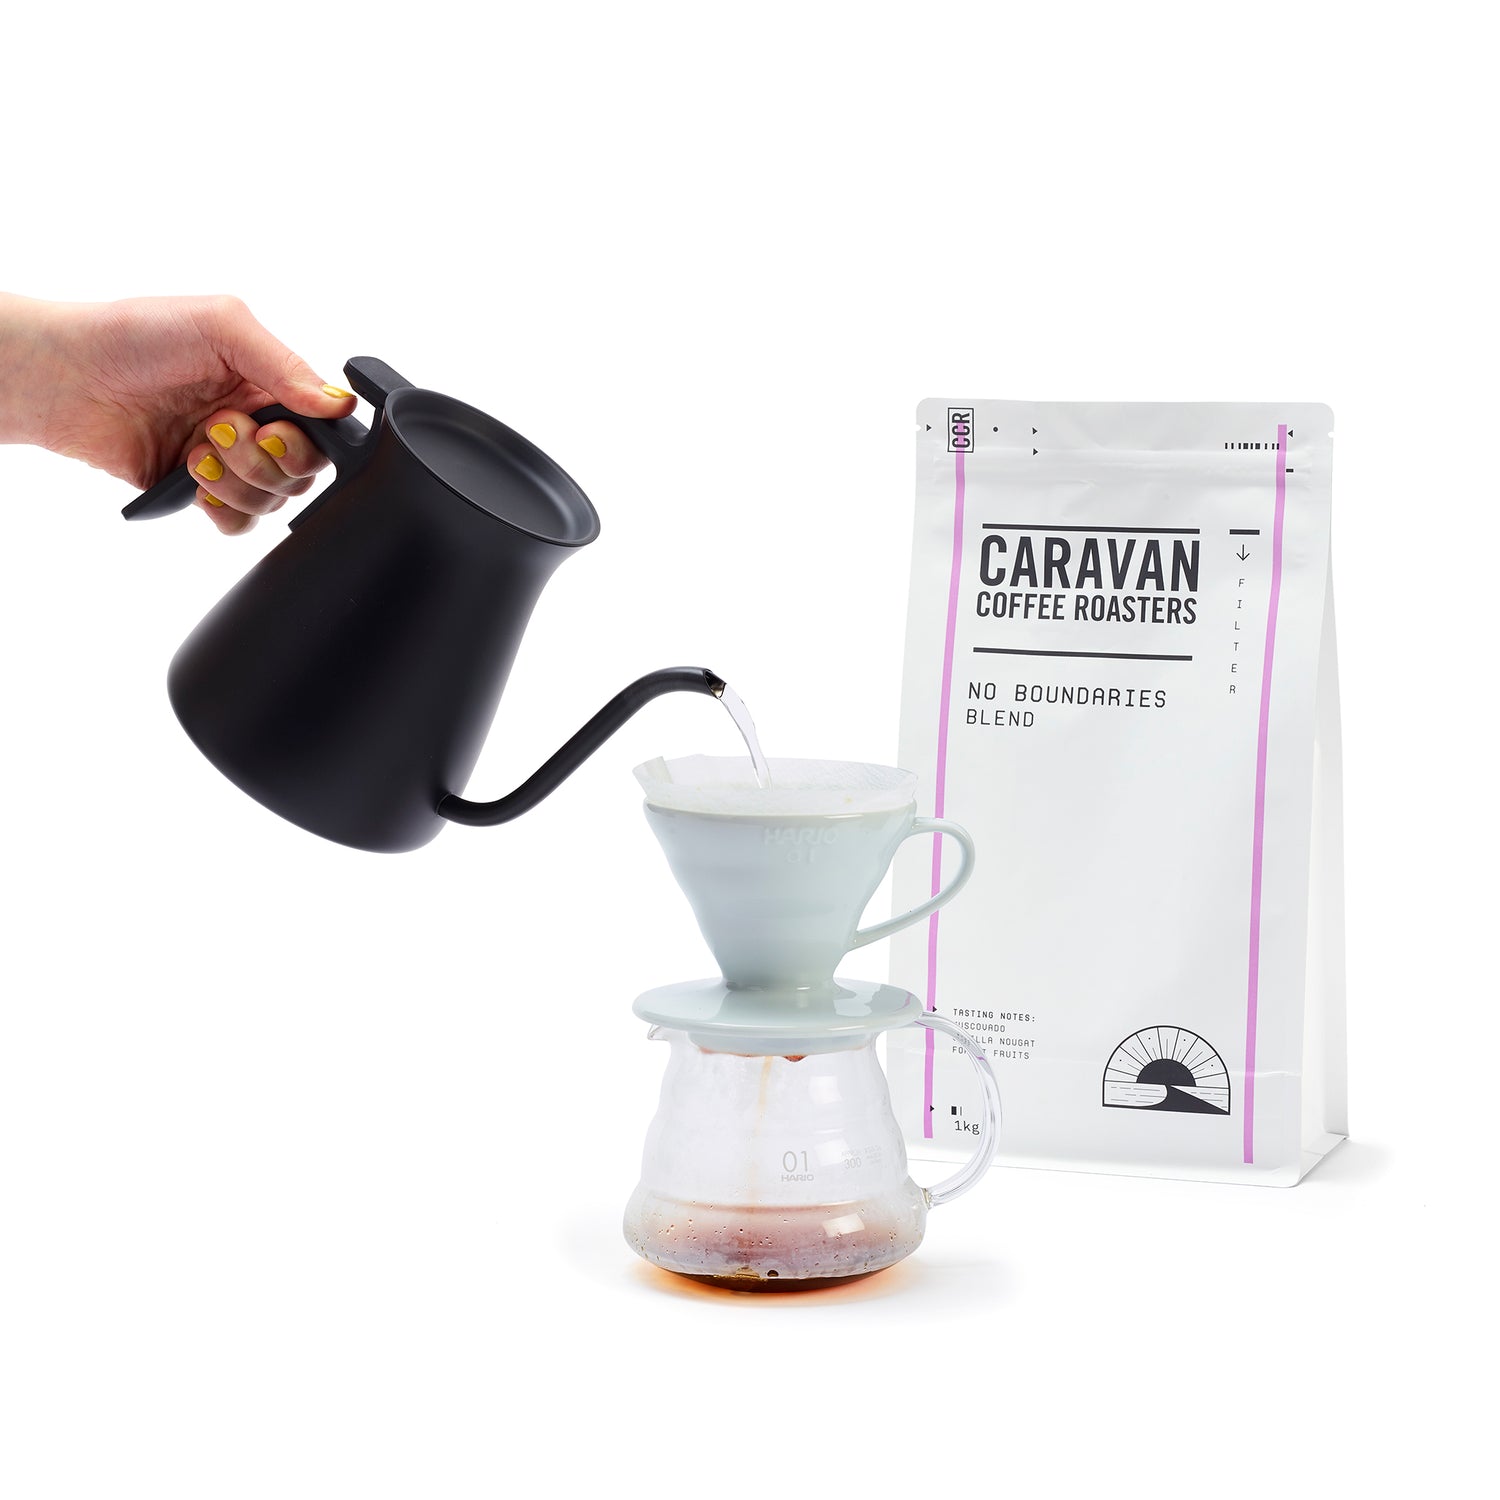 V60 pour over coffee brew guide | Caravan Coffee Roasters